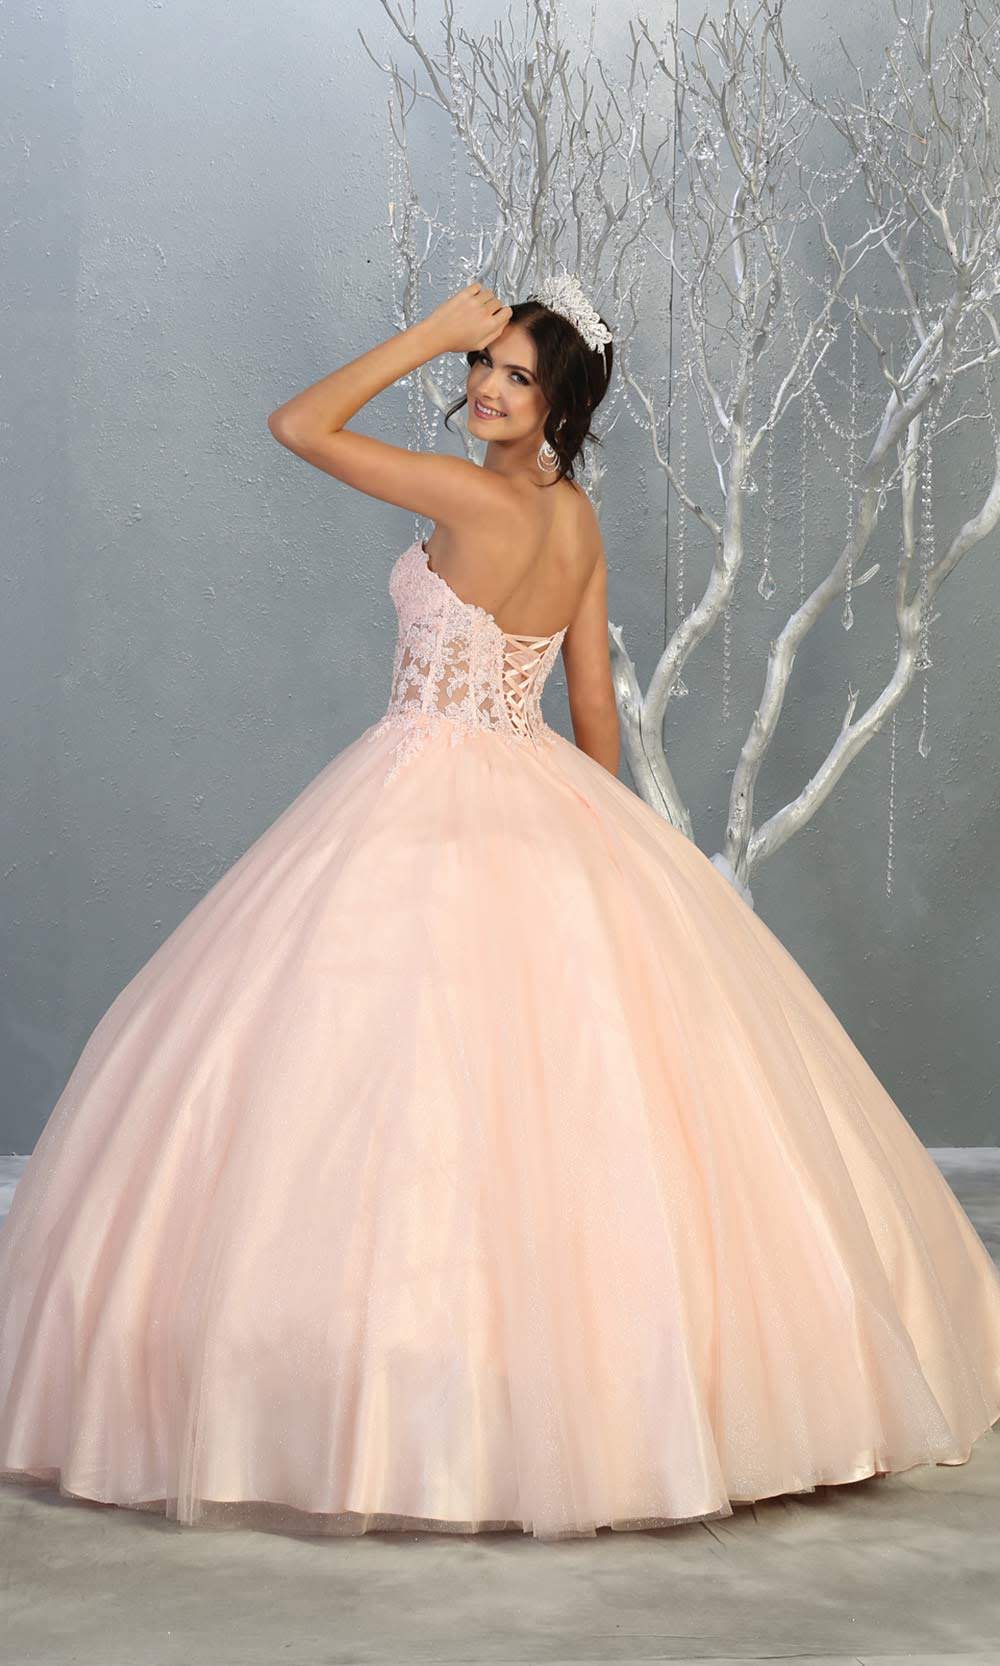 Mayqueen LK141 blush pink quinceanera strapless ball gown w/lace detail. This light pink ball gown is perfect for engagement dress, wedding reception, indowestern party gown, sweet 16, debut, sweet 15, sweet 18. Plus sizes available for ballgowns-b